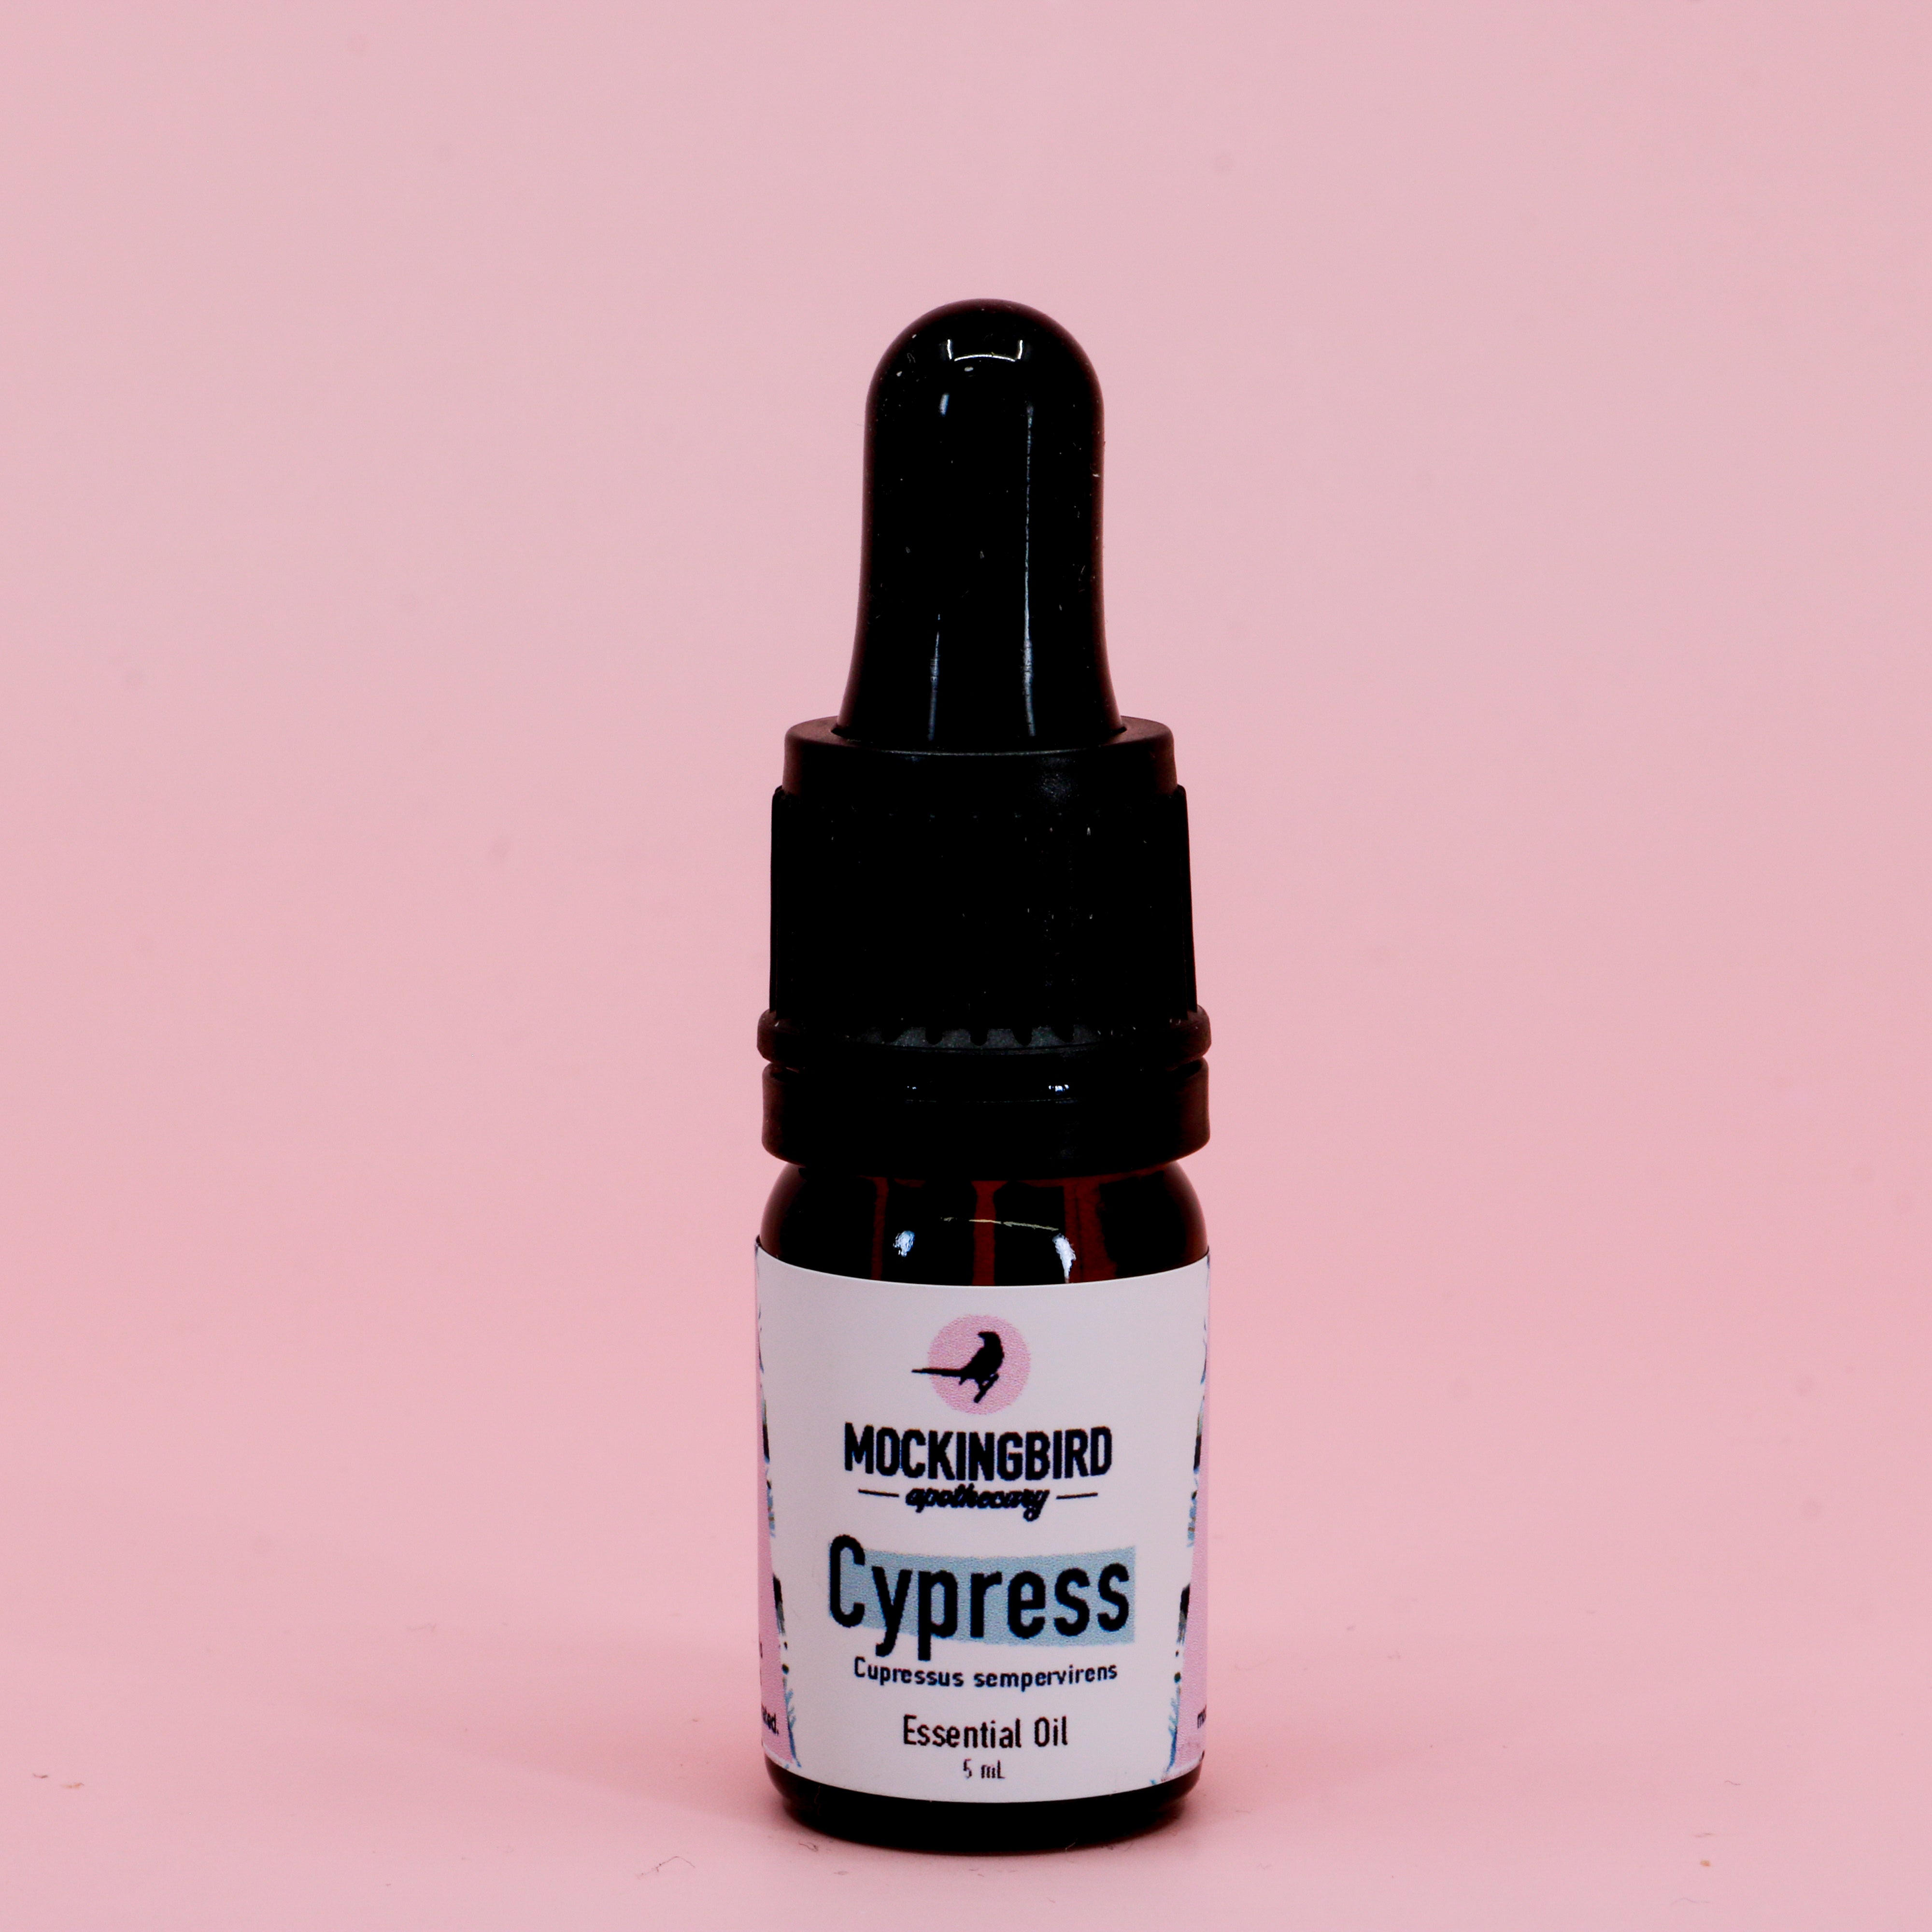 Cypress Essential Oil (Cupressus sempervirens) - The Mockingbird Apothecary & General Store